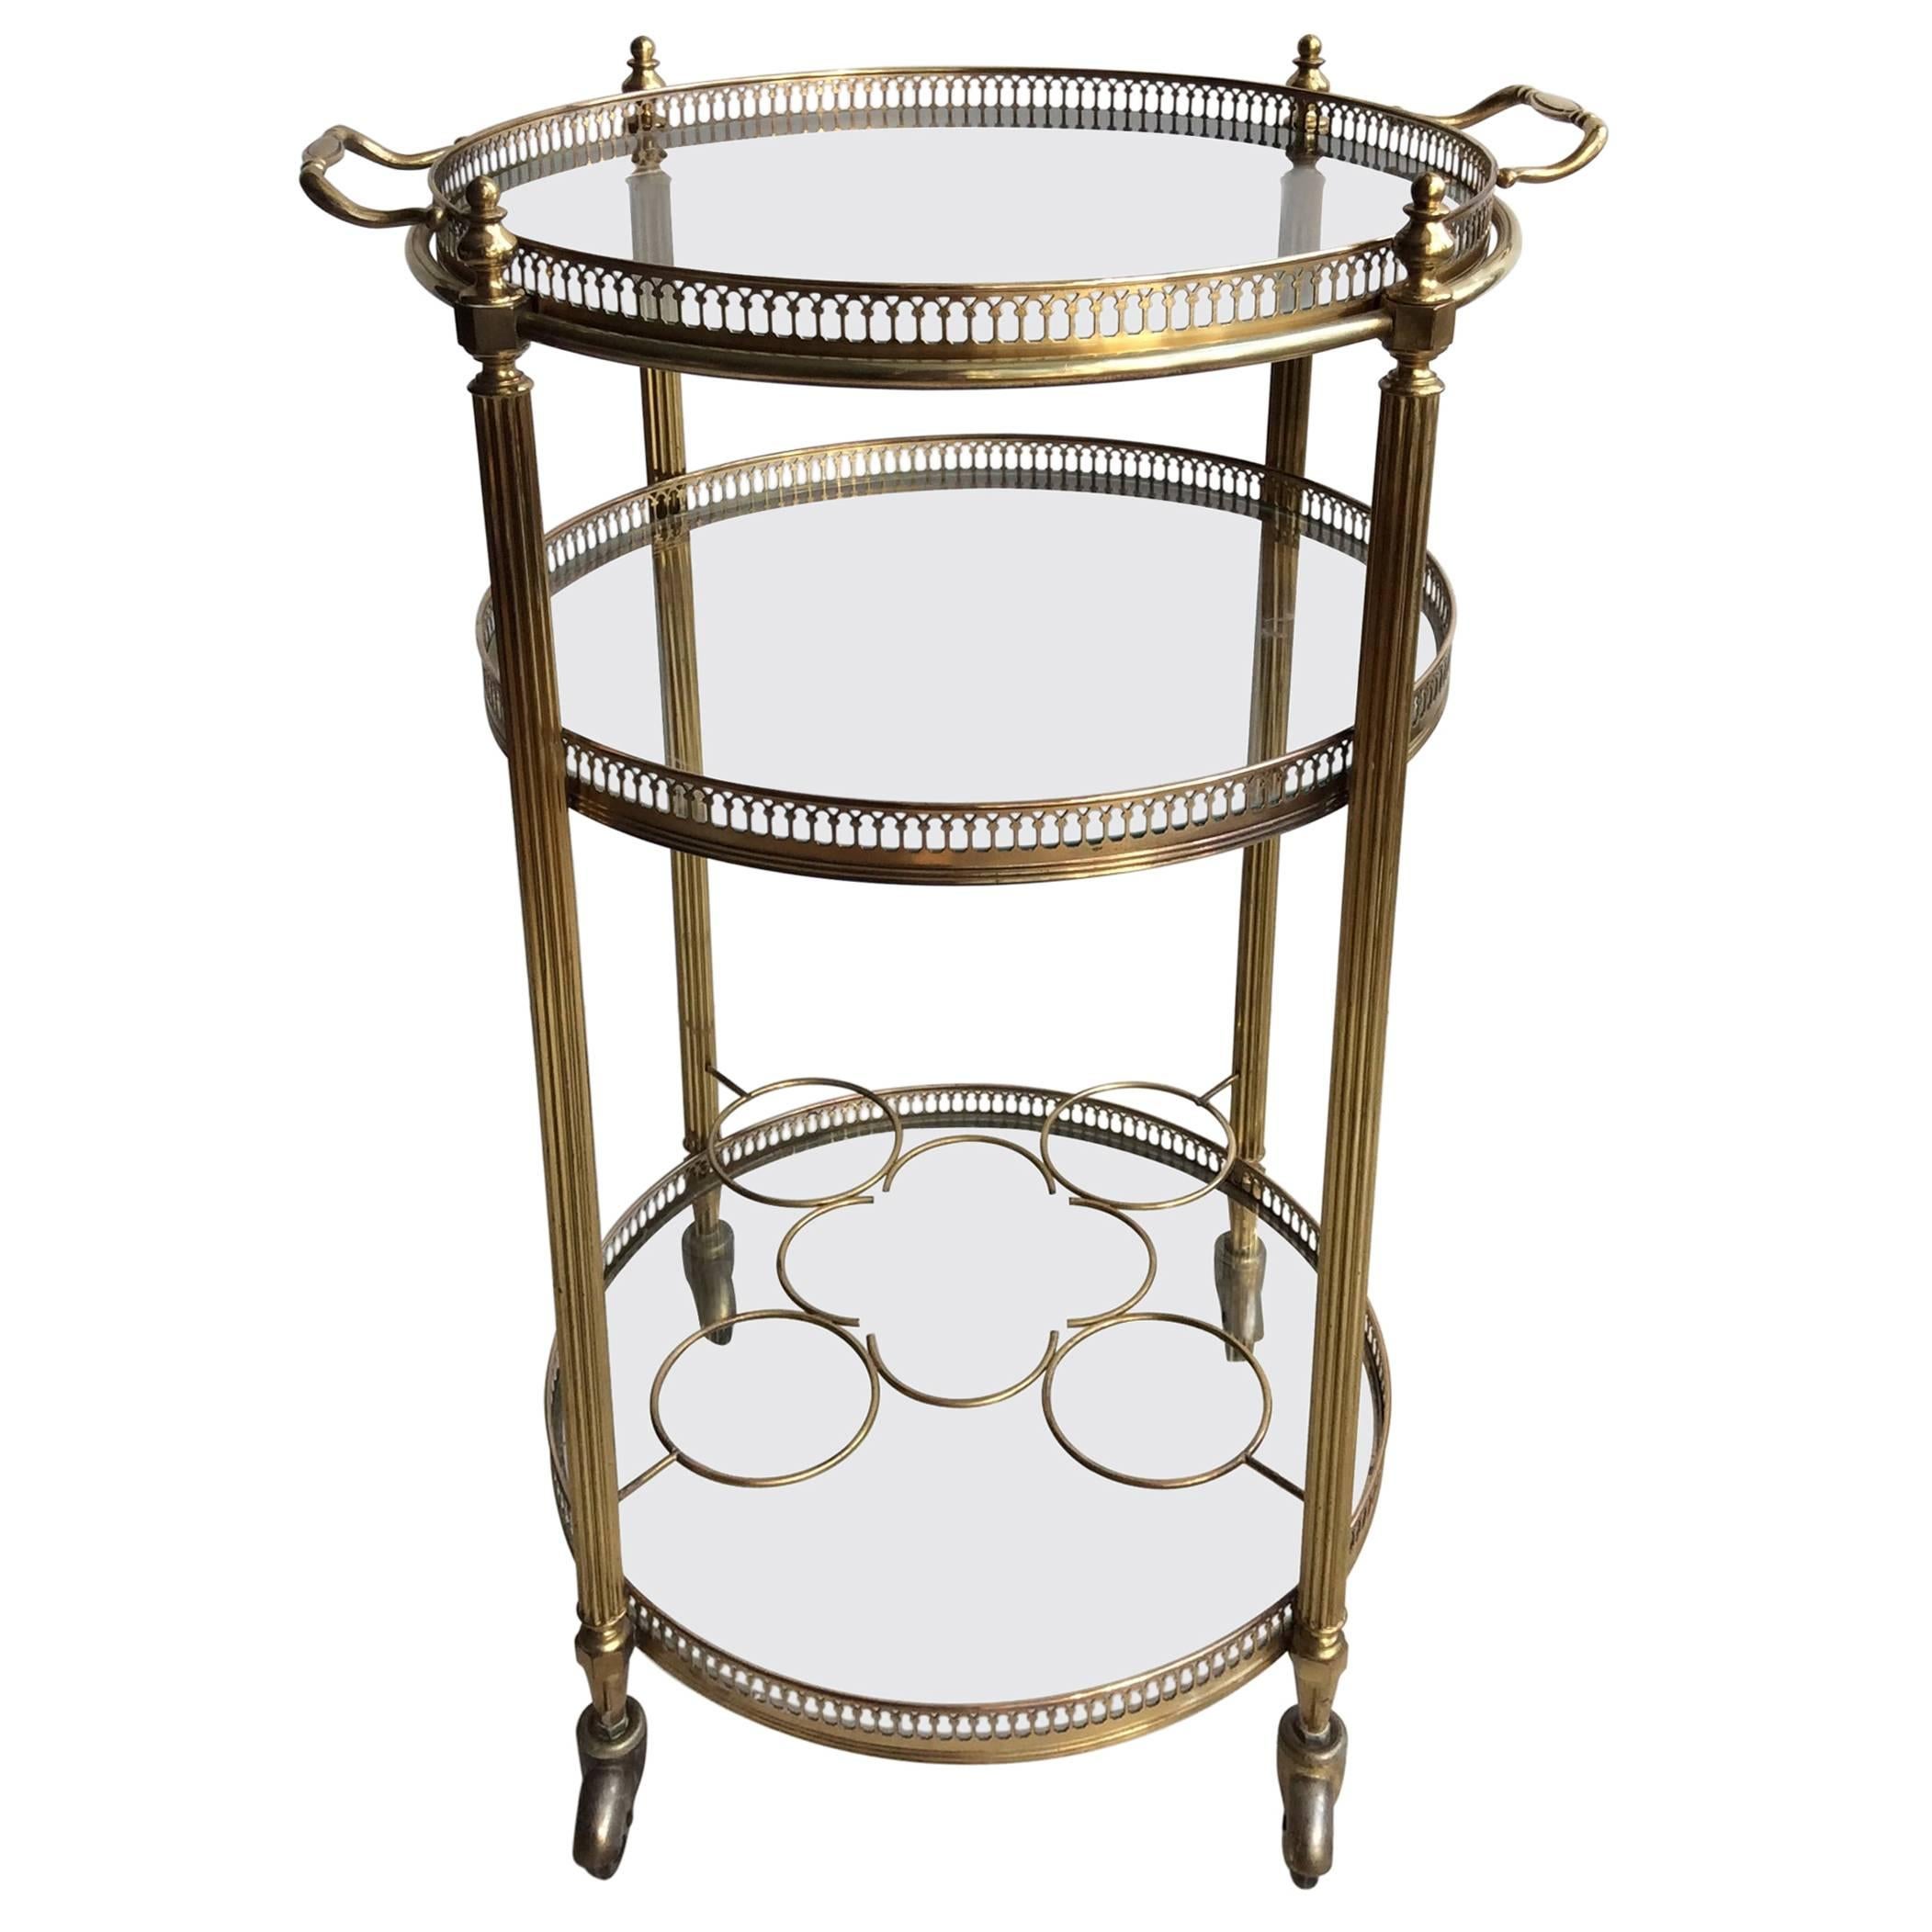 Circular Vintage French Brass Drinks Trolley or Cart